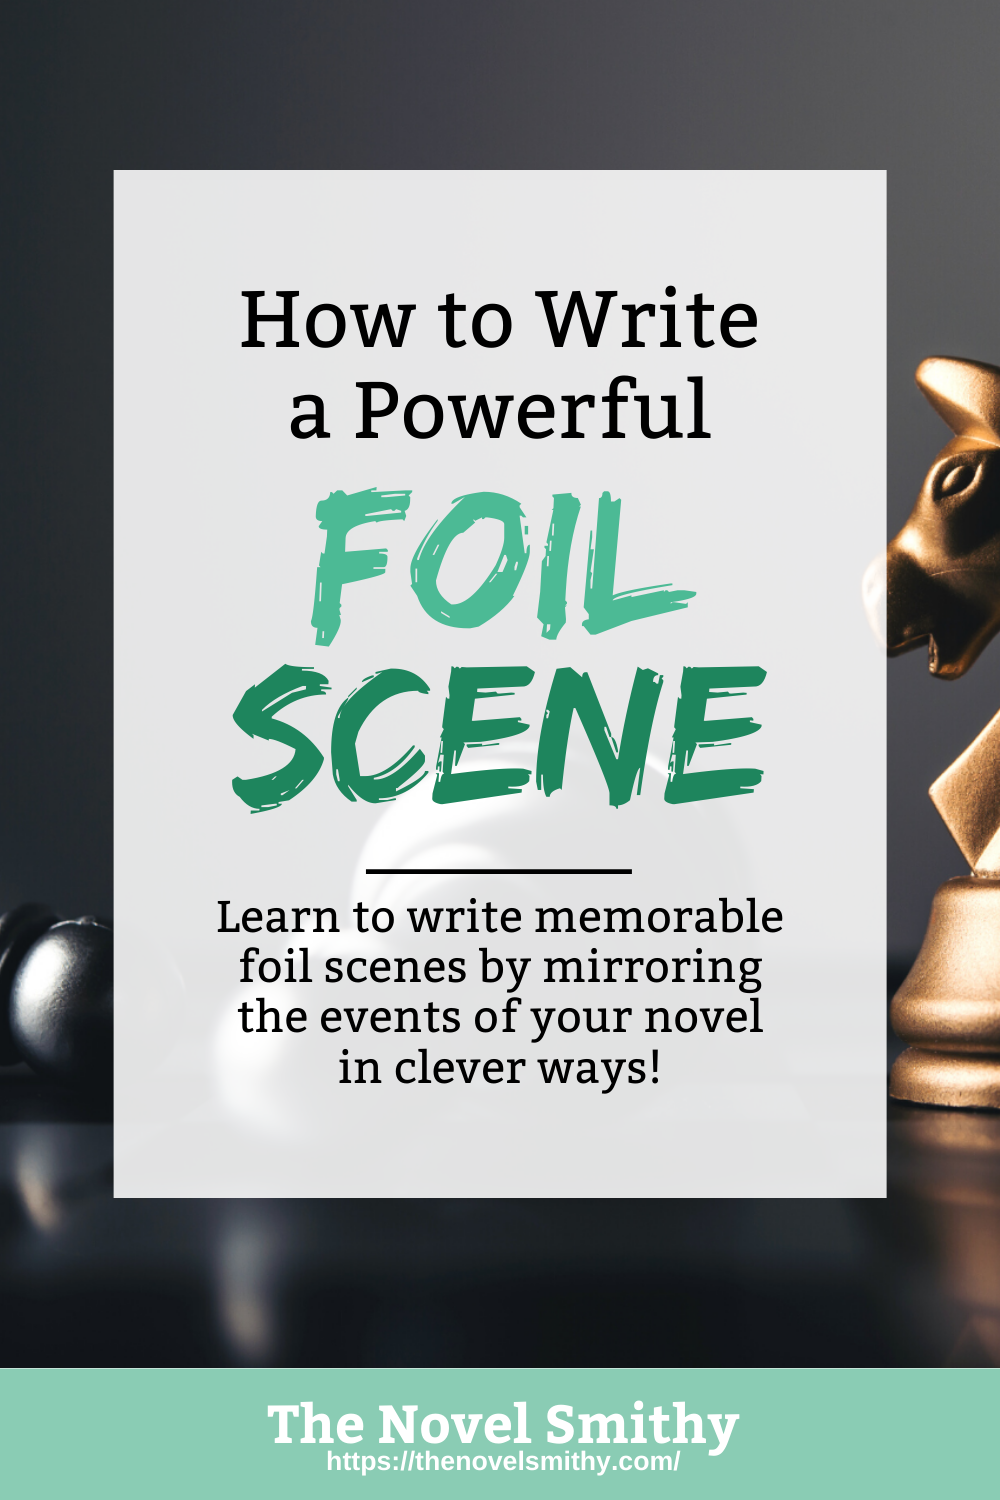 How to Write a Powerful Foil Scene